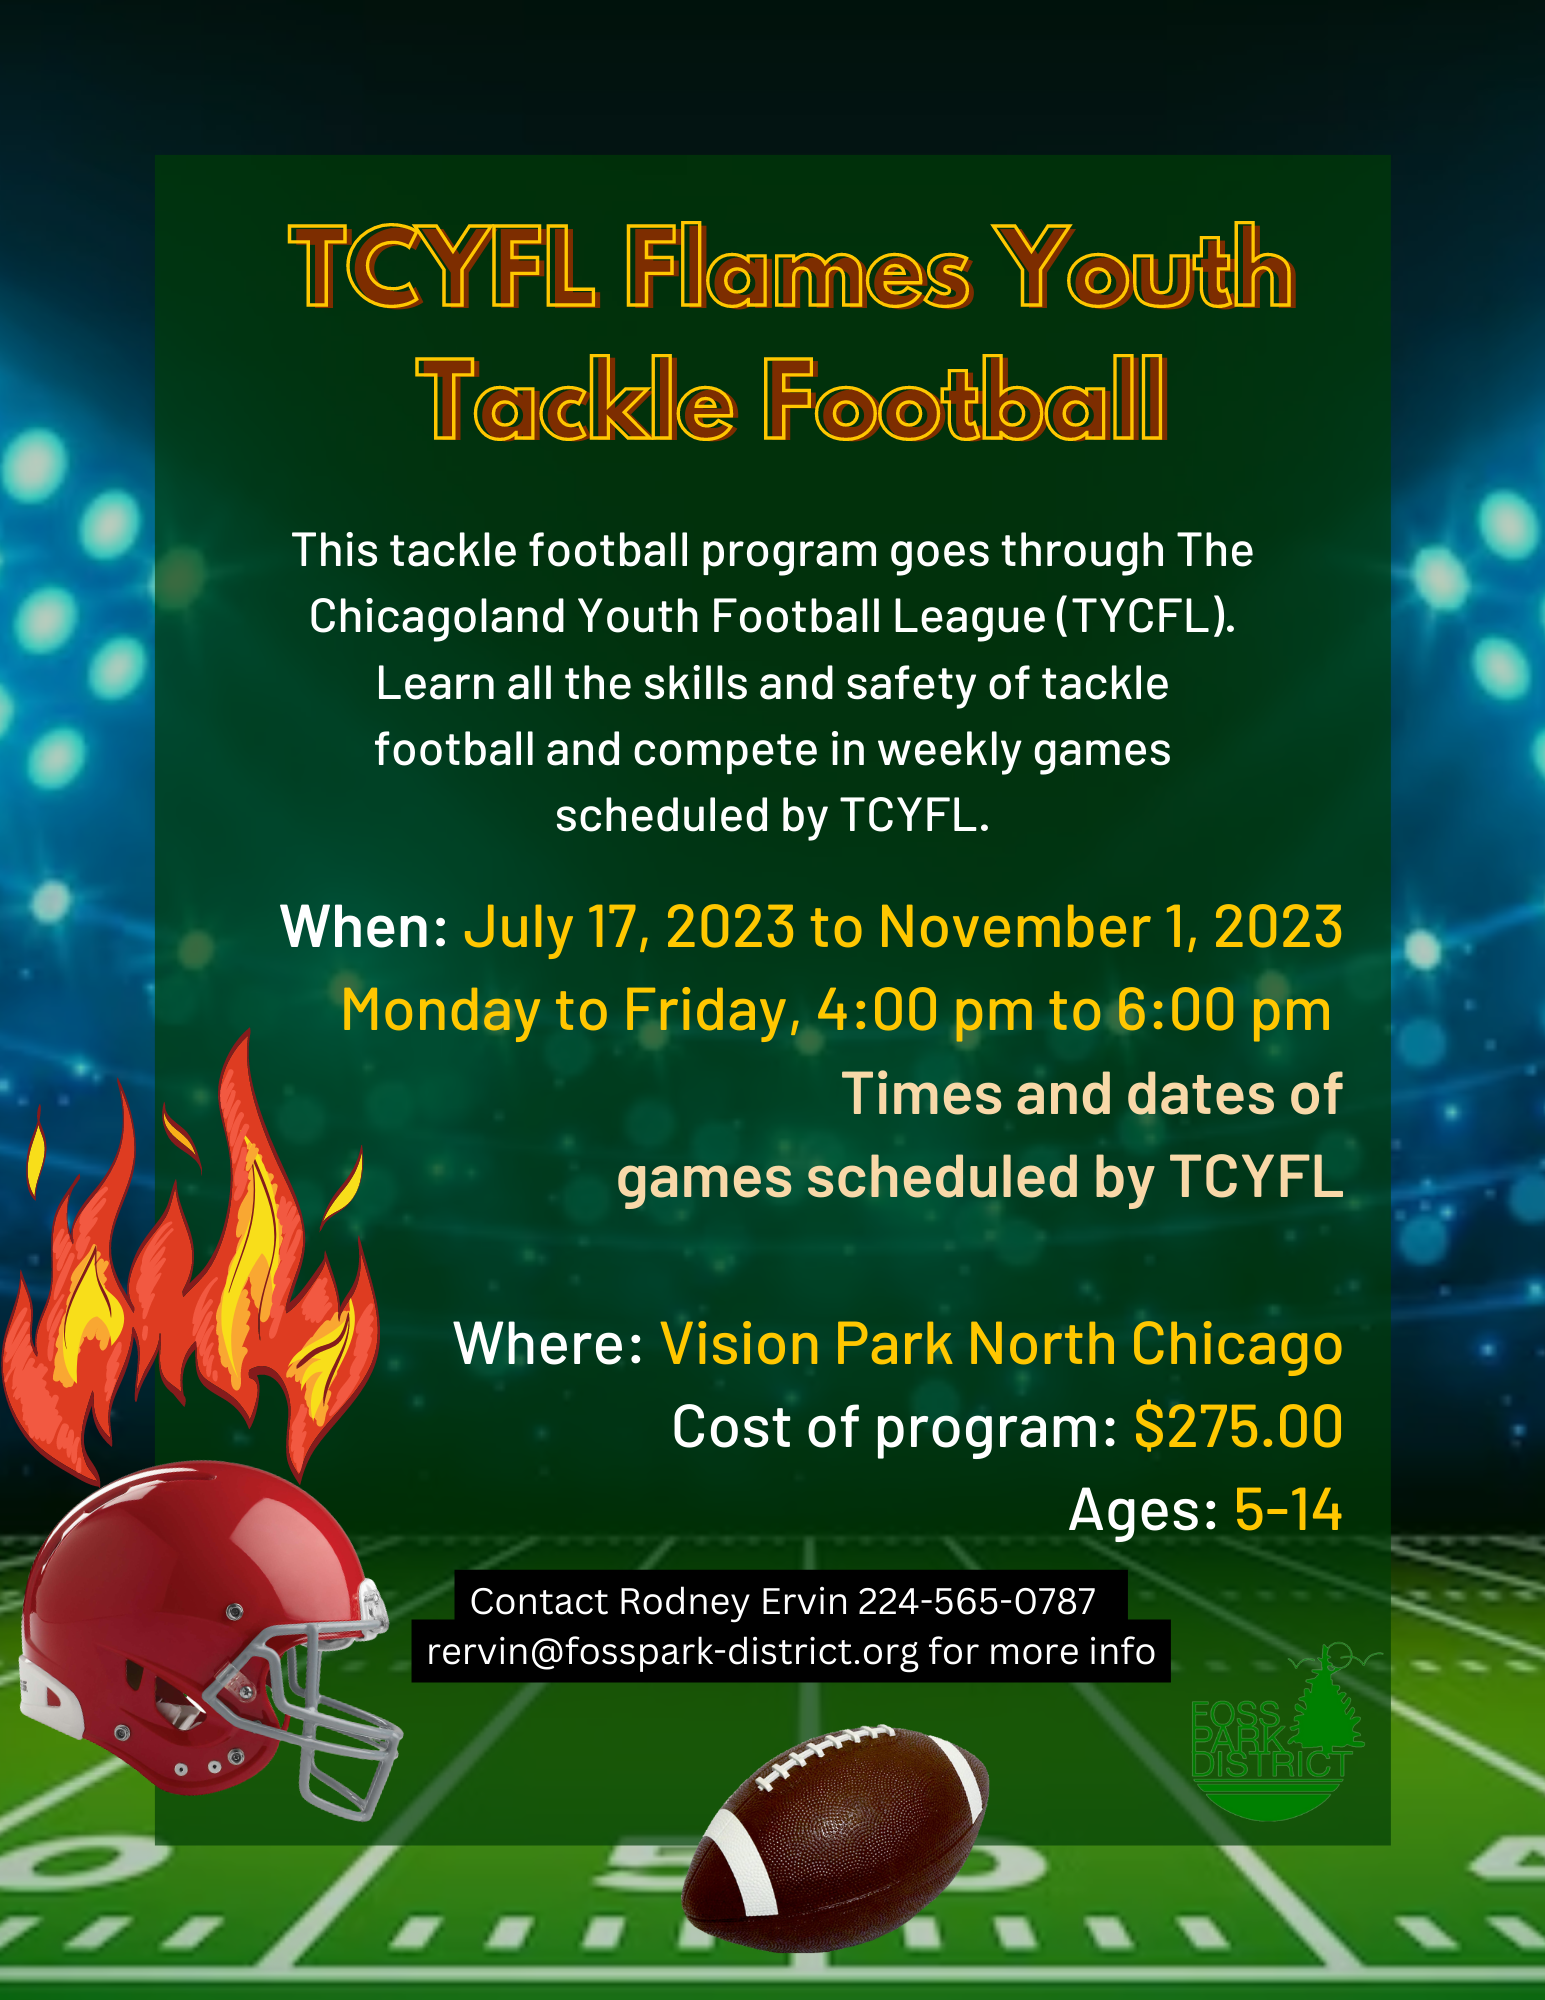 TCYFL Flames Youth Tackle Football